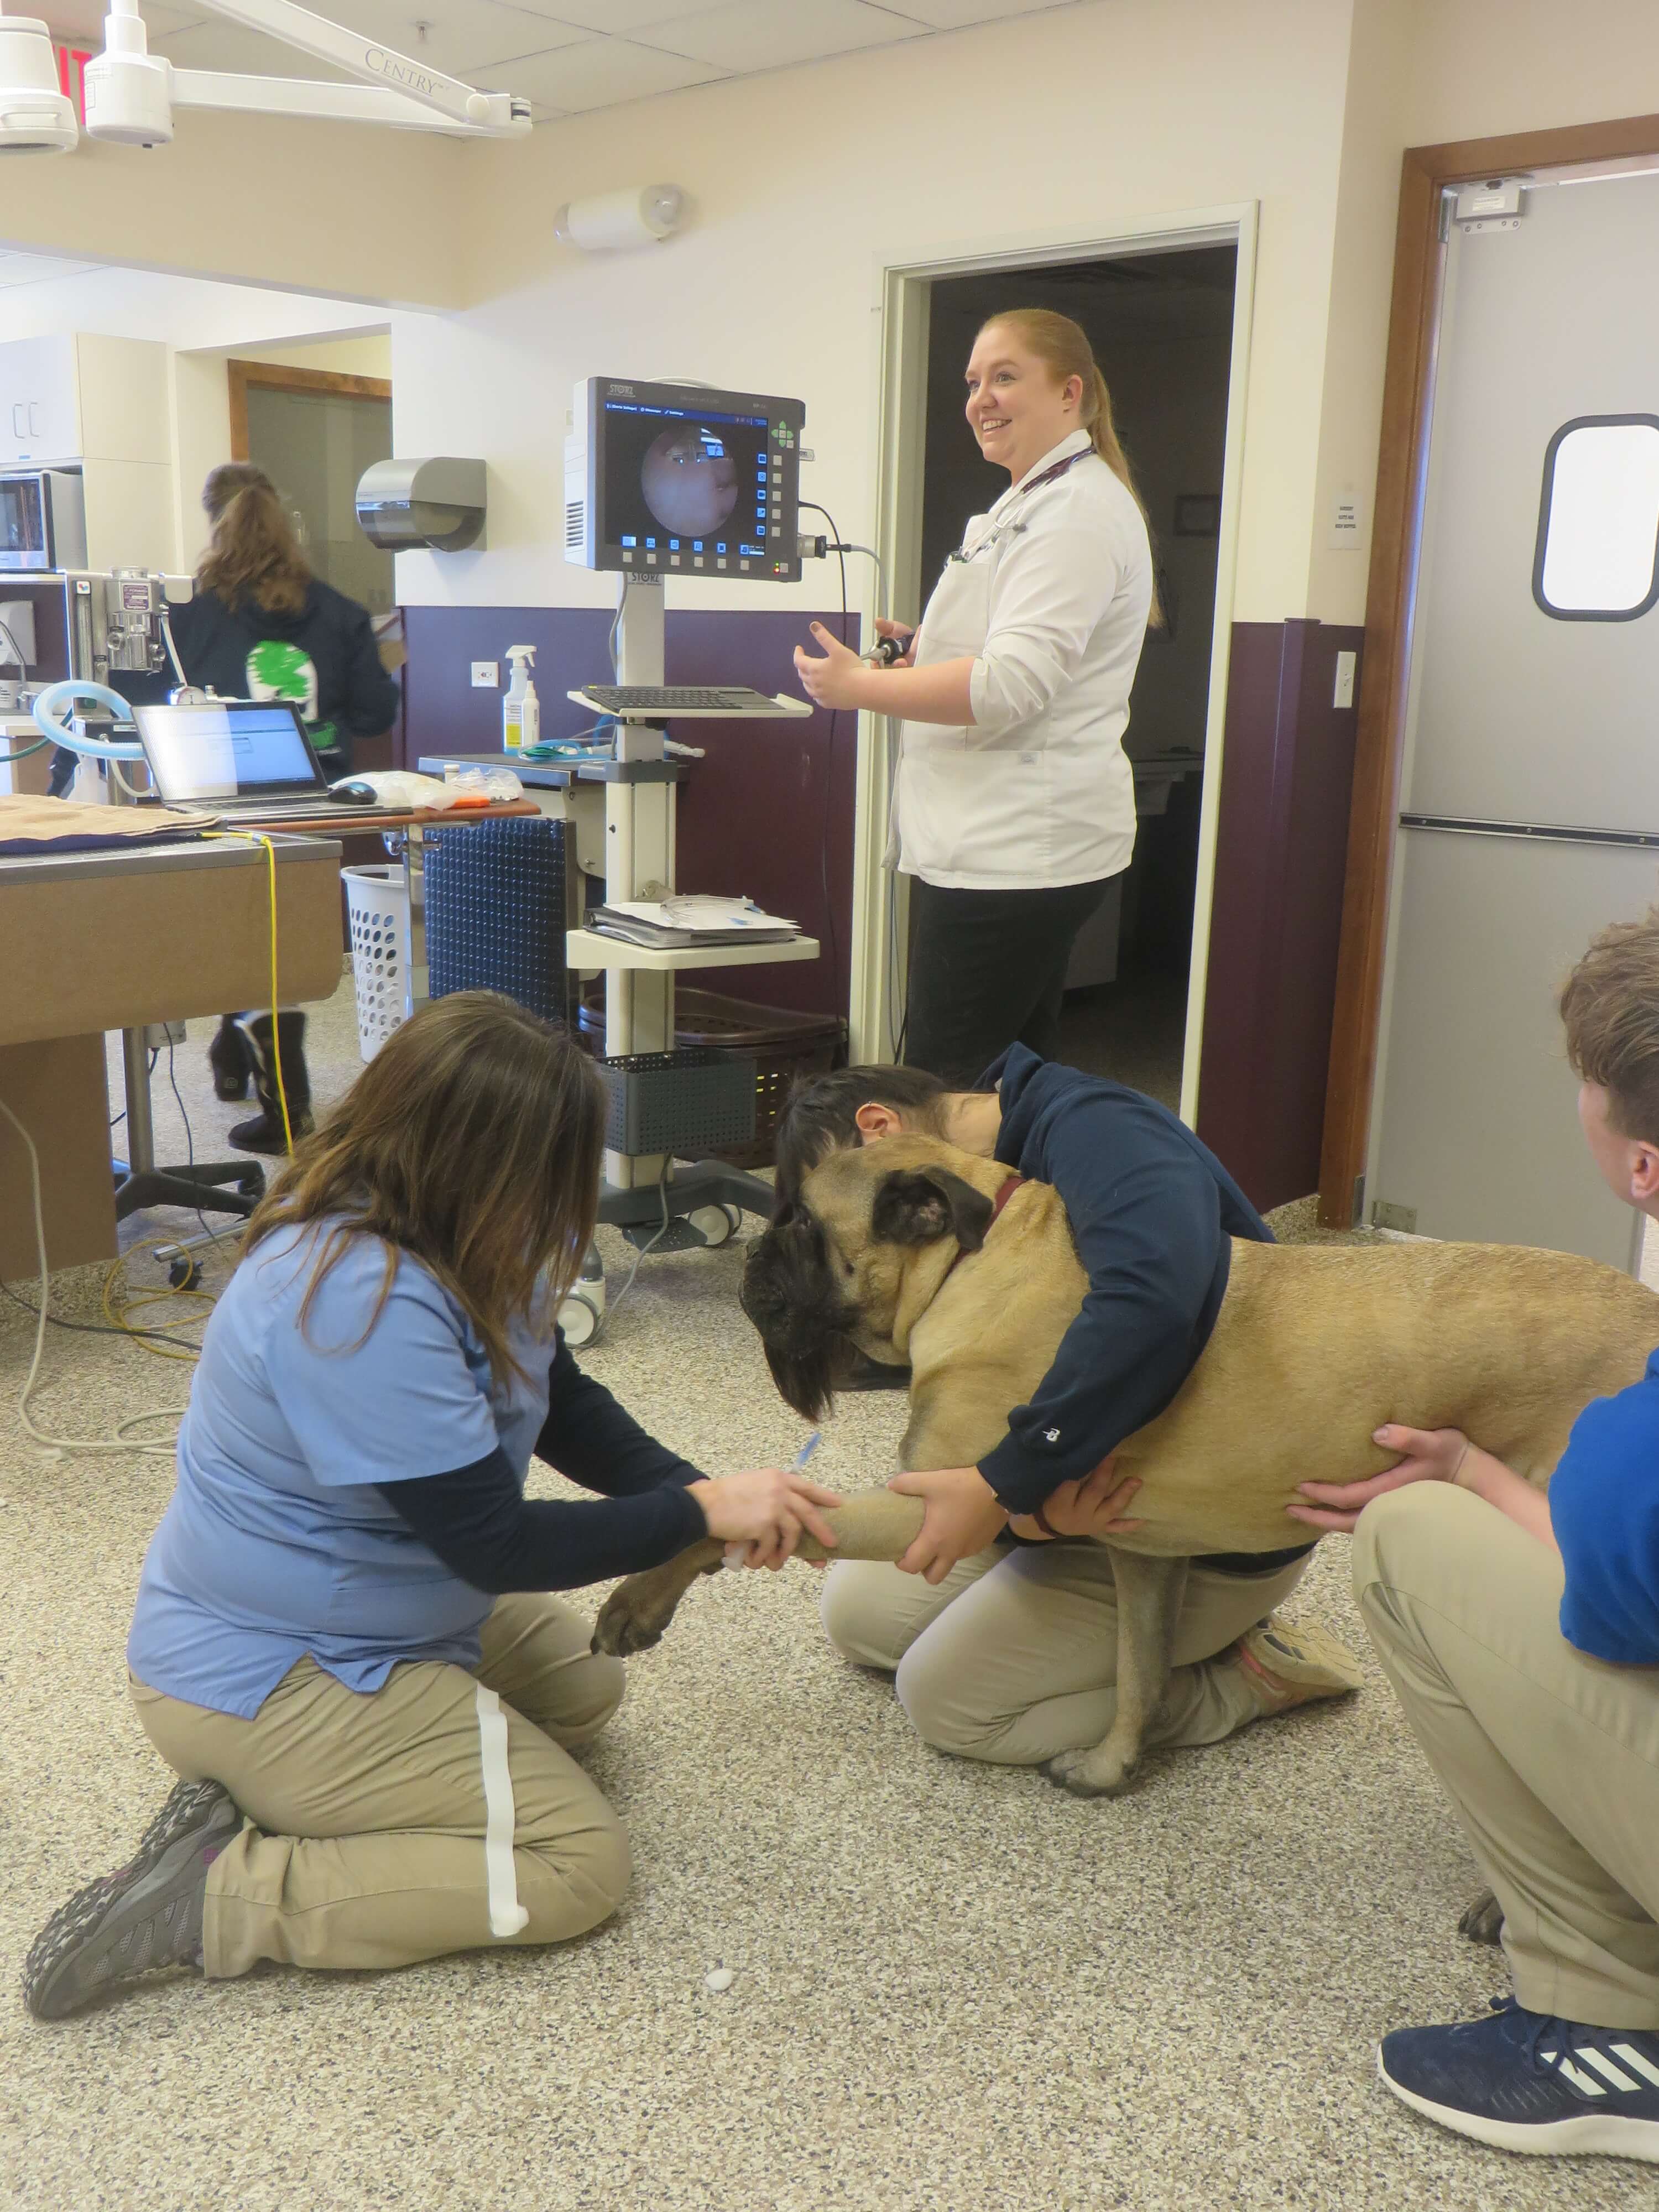 Technicians and veterinarian in treatment area of hospital with dog